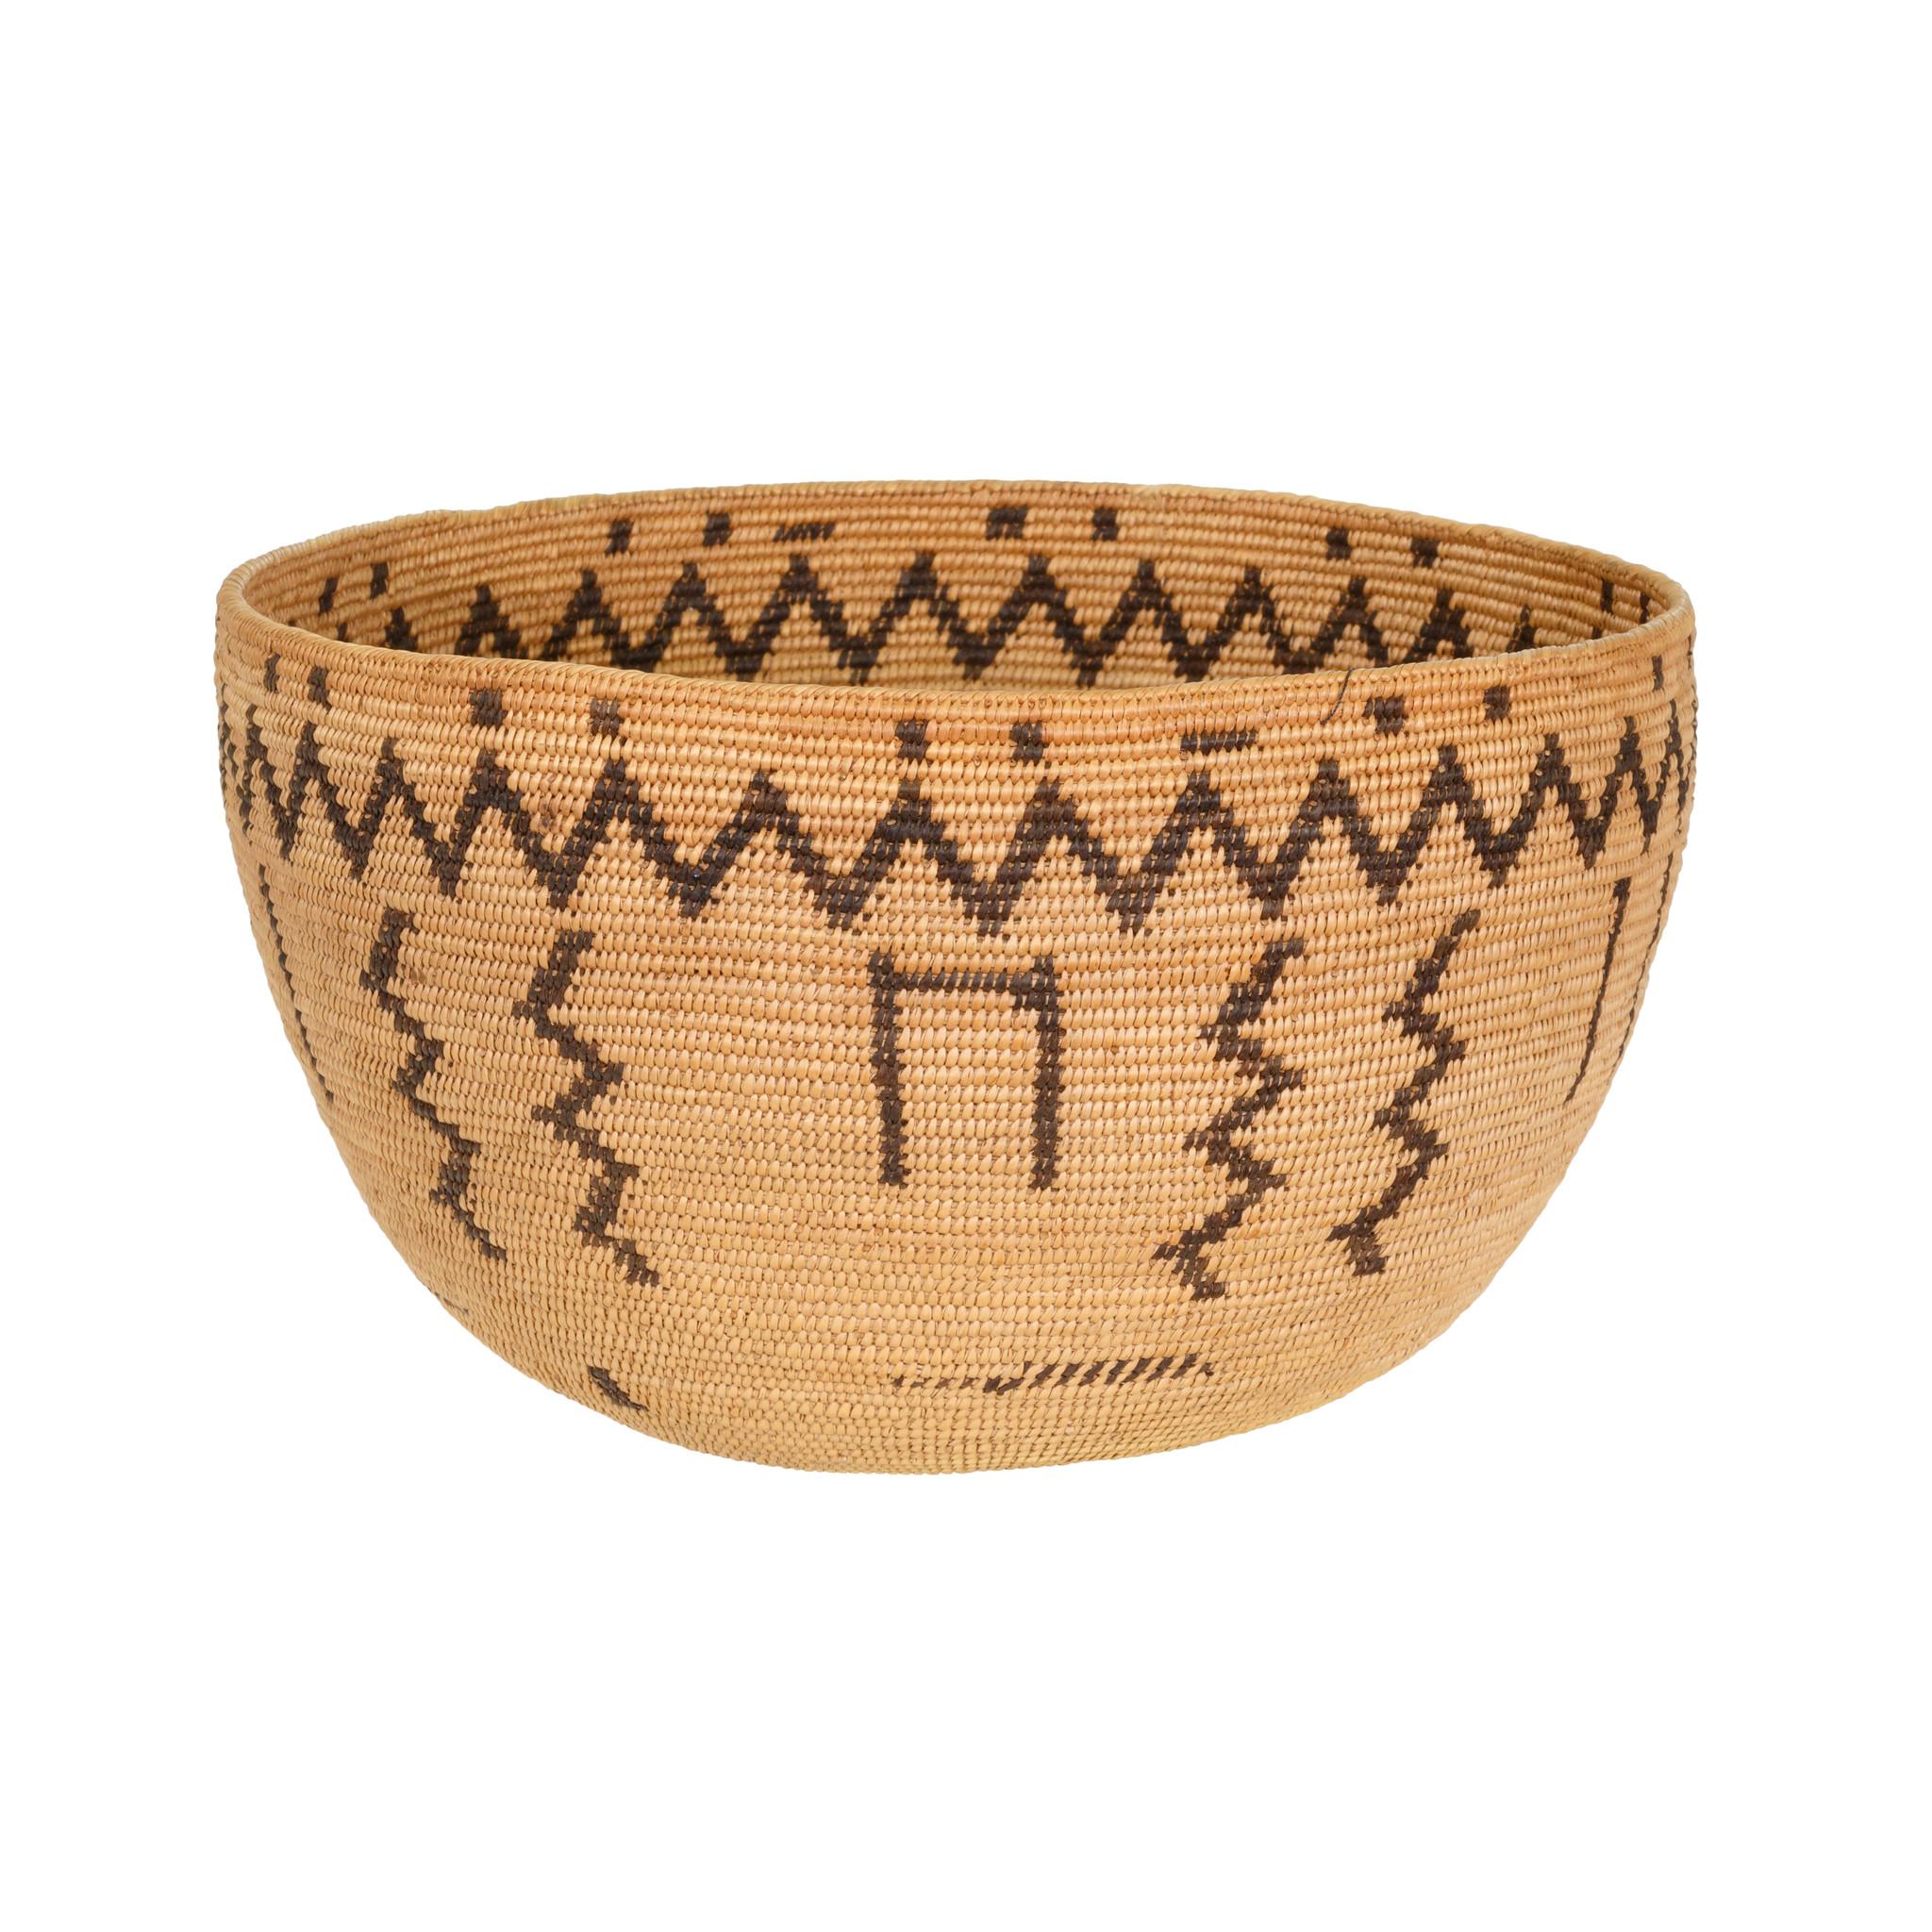 Native American Miwok Woven Bowl For Sale